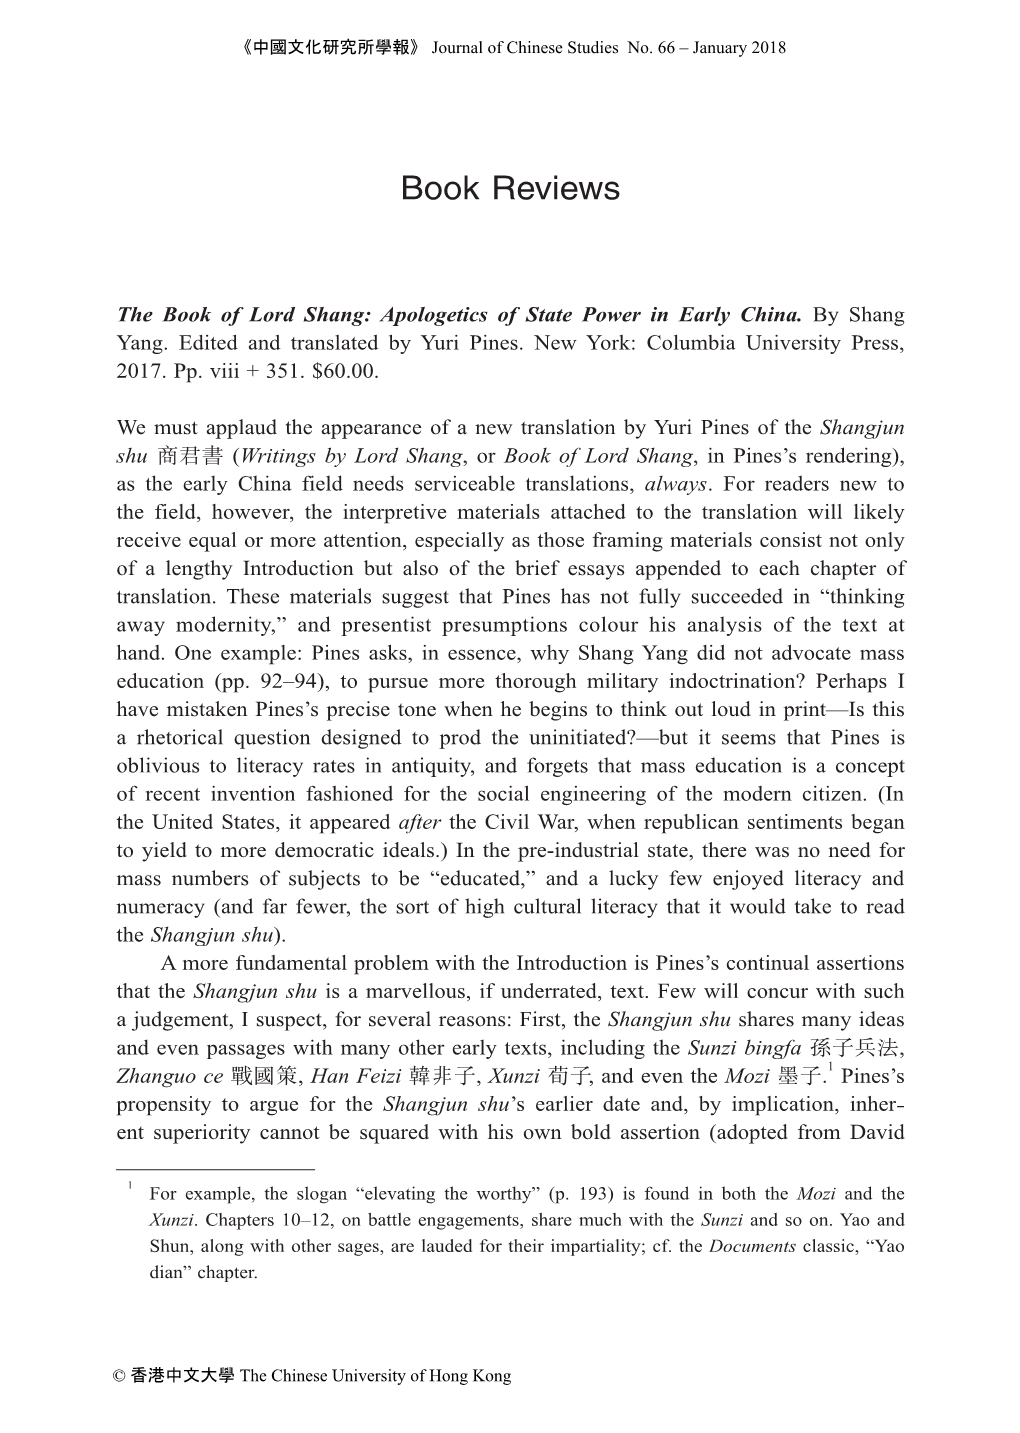 The Book of Lord Shang: Apologetics of State Power in Early China